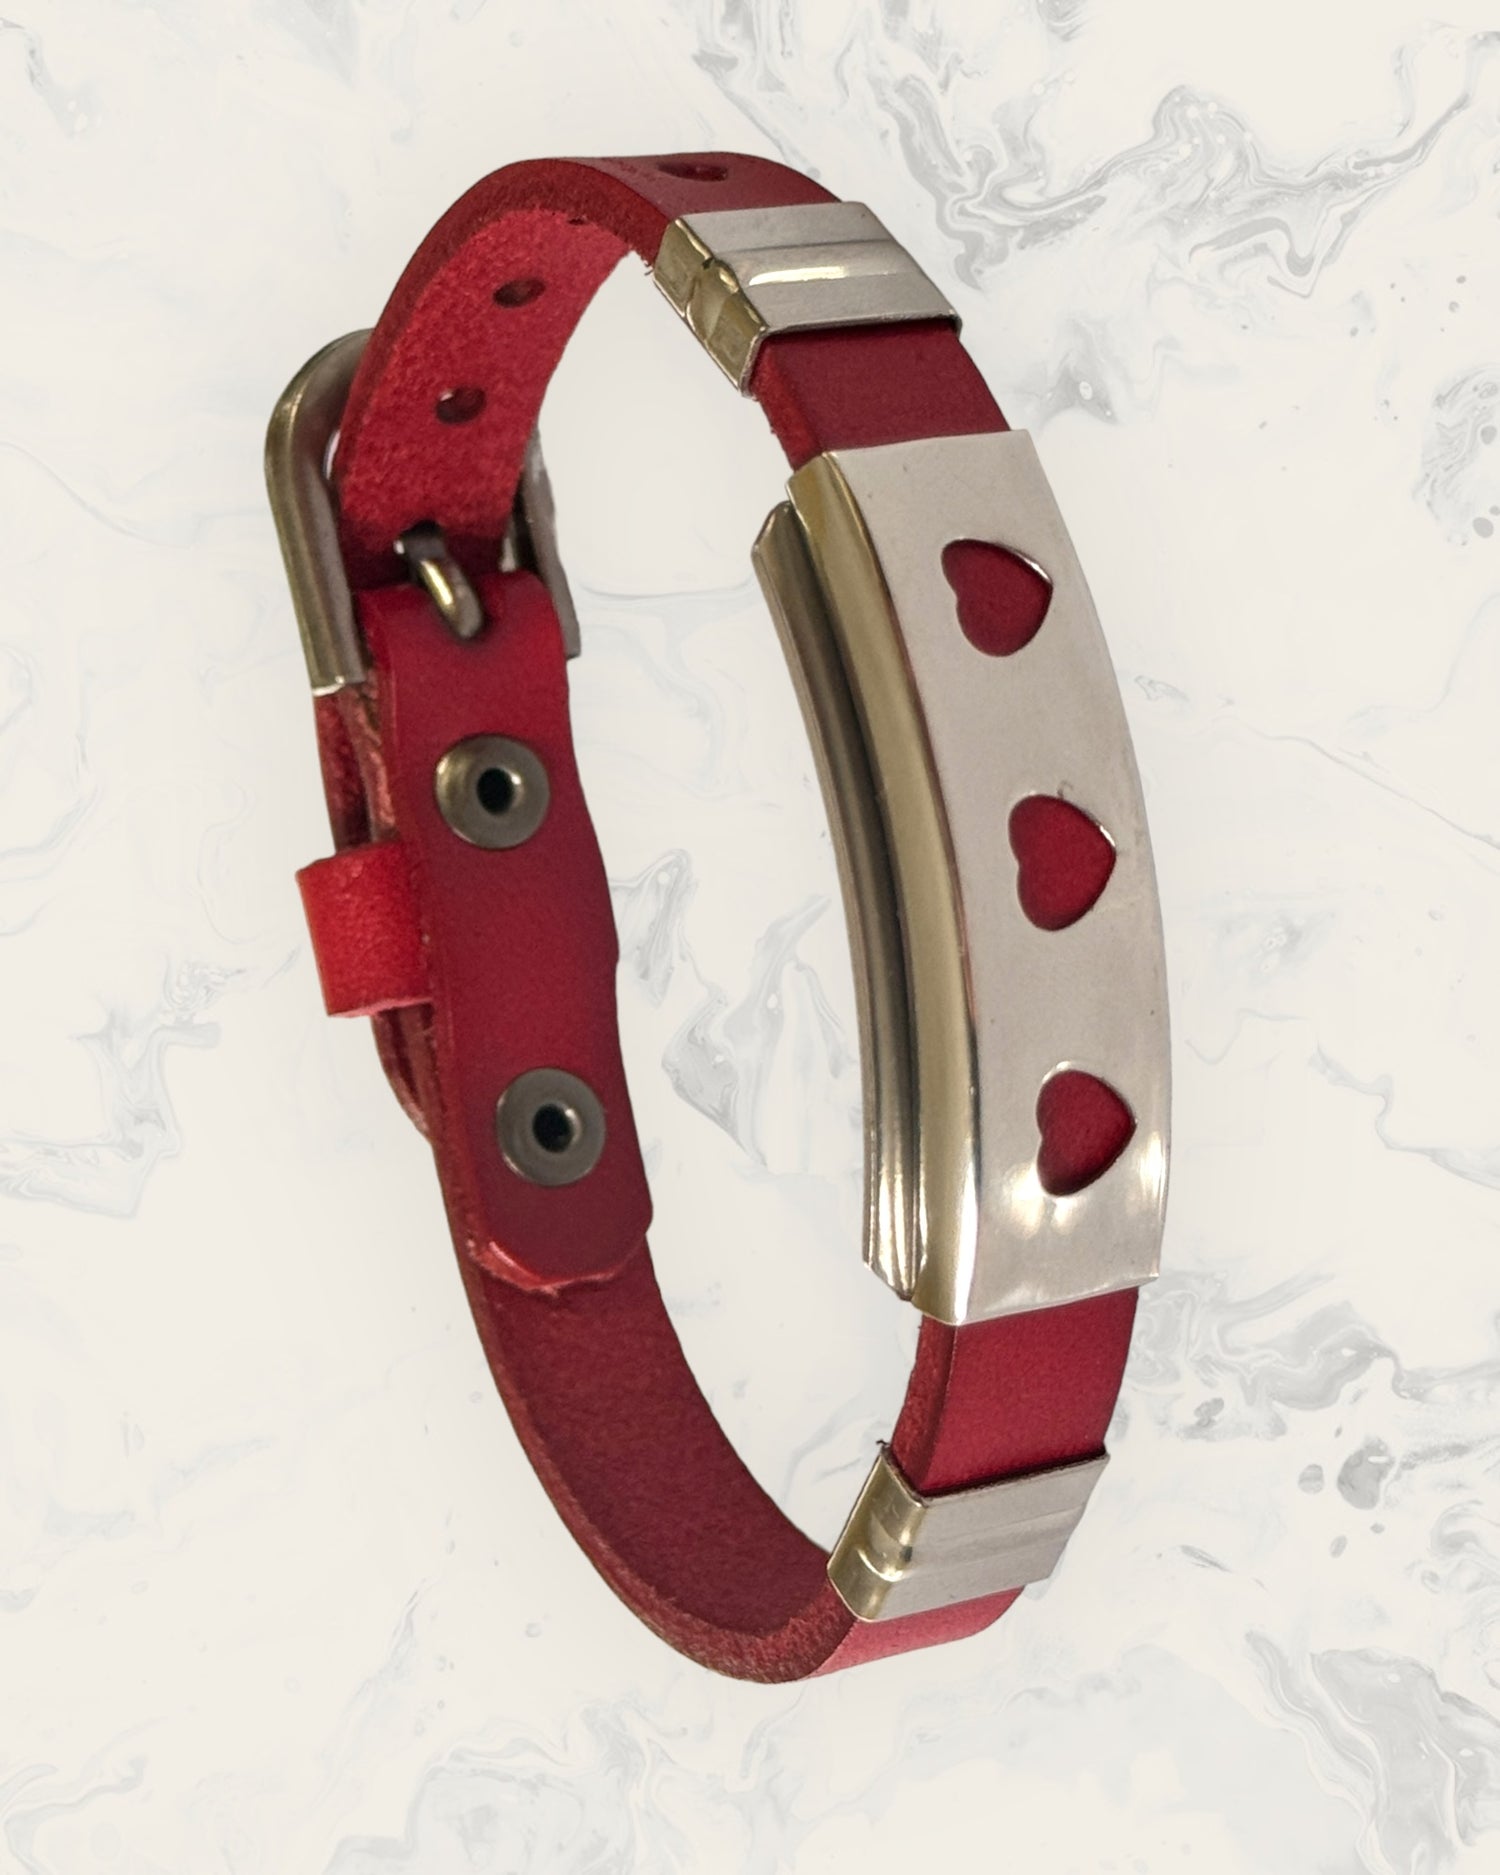 Frequency Jewelry Natural Pain Relief and EMF Protection Bracelet Leather Band Color Red with Three Hearts design on a silver metal slider